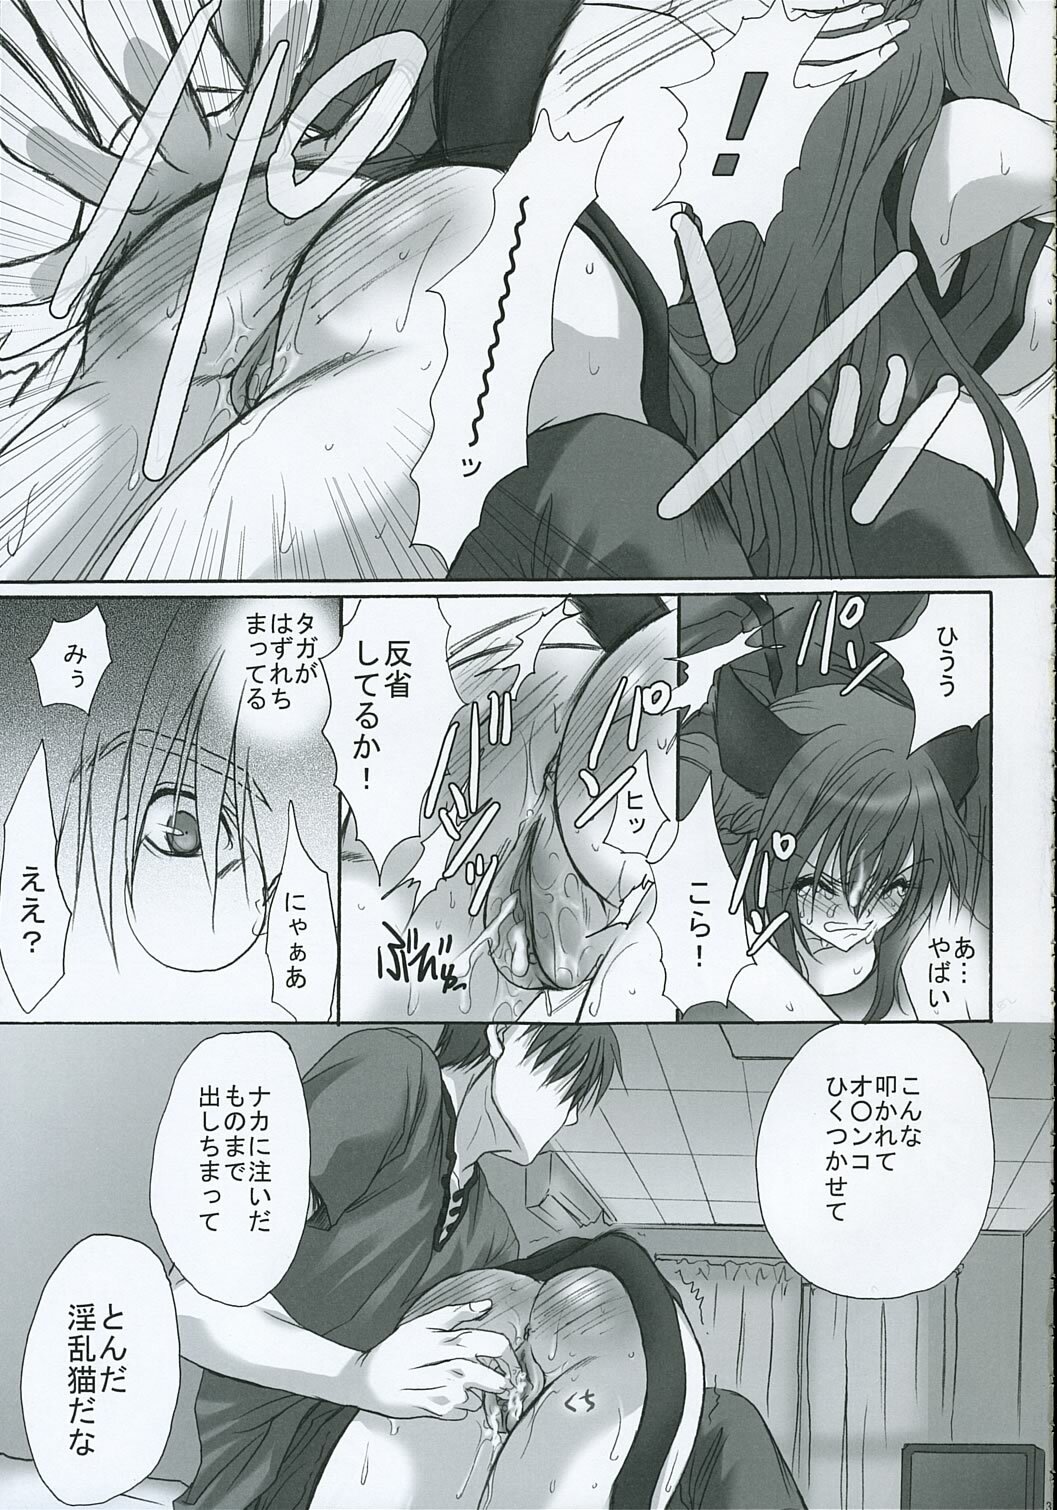 [Saihate no Maria] DANGER ZONE (Guilty Gear XX) page 30 full